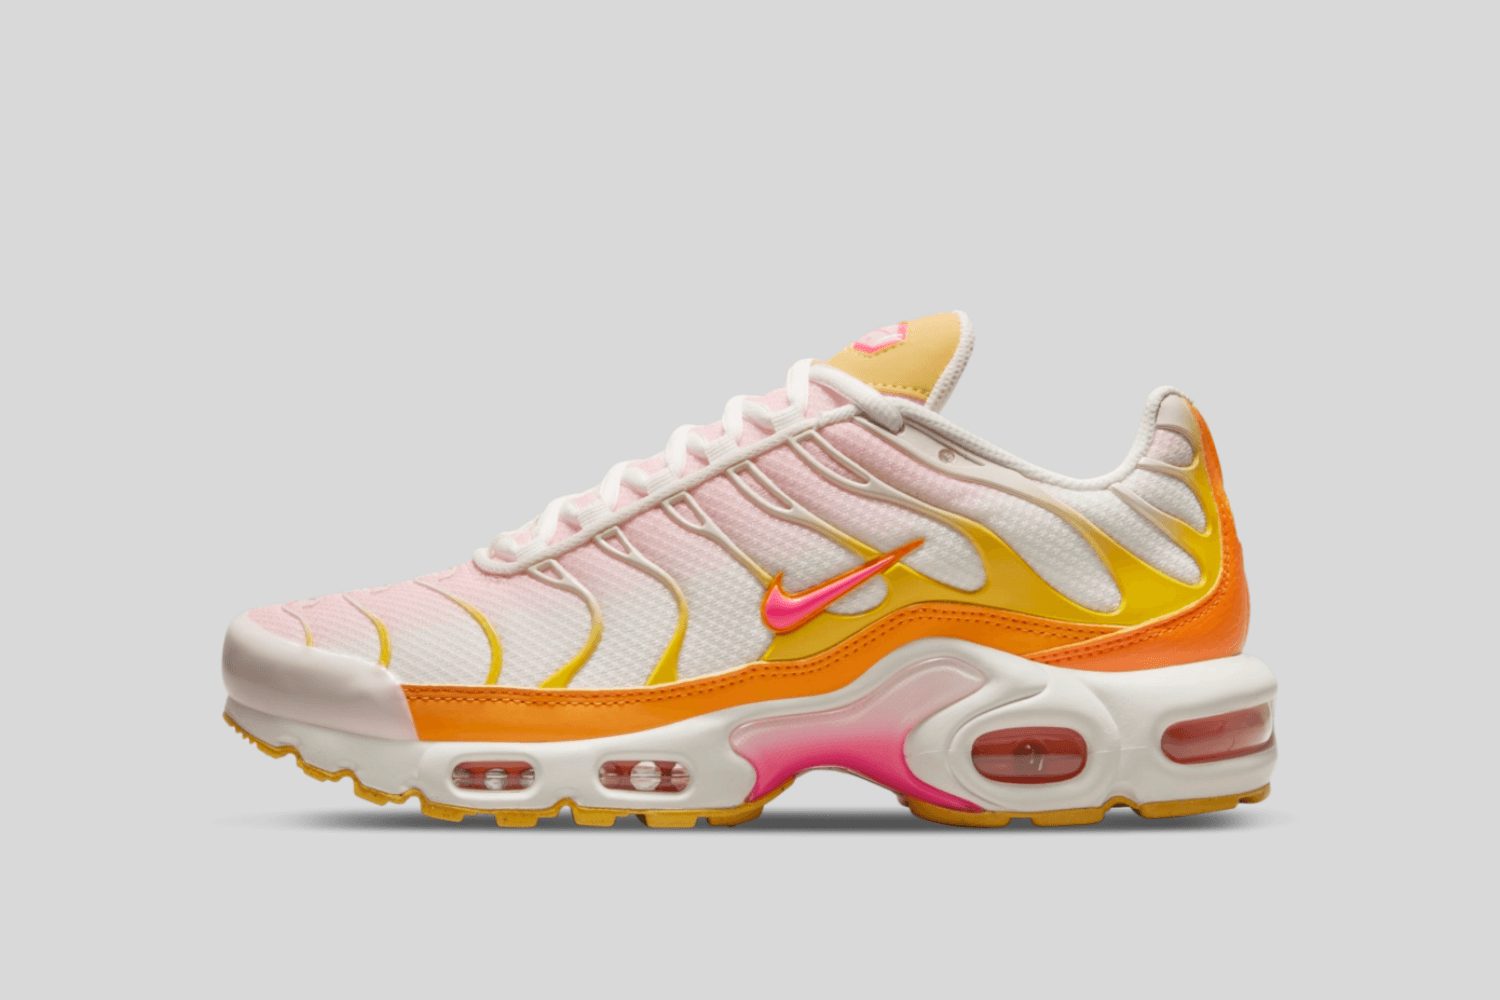 Get Summer-ready with the Nike Air Max Plus 'Sherbet'